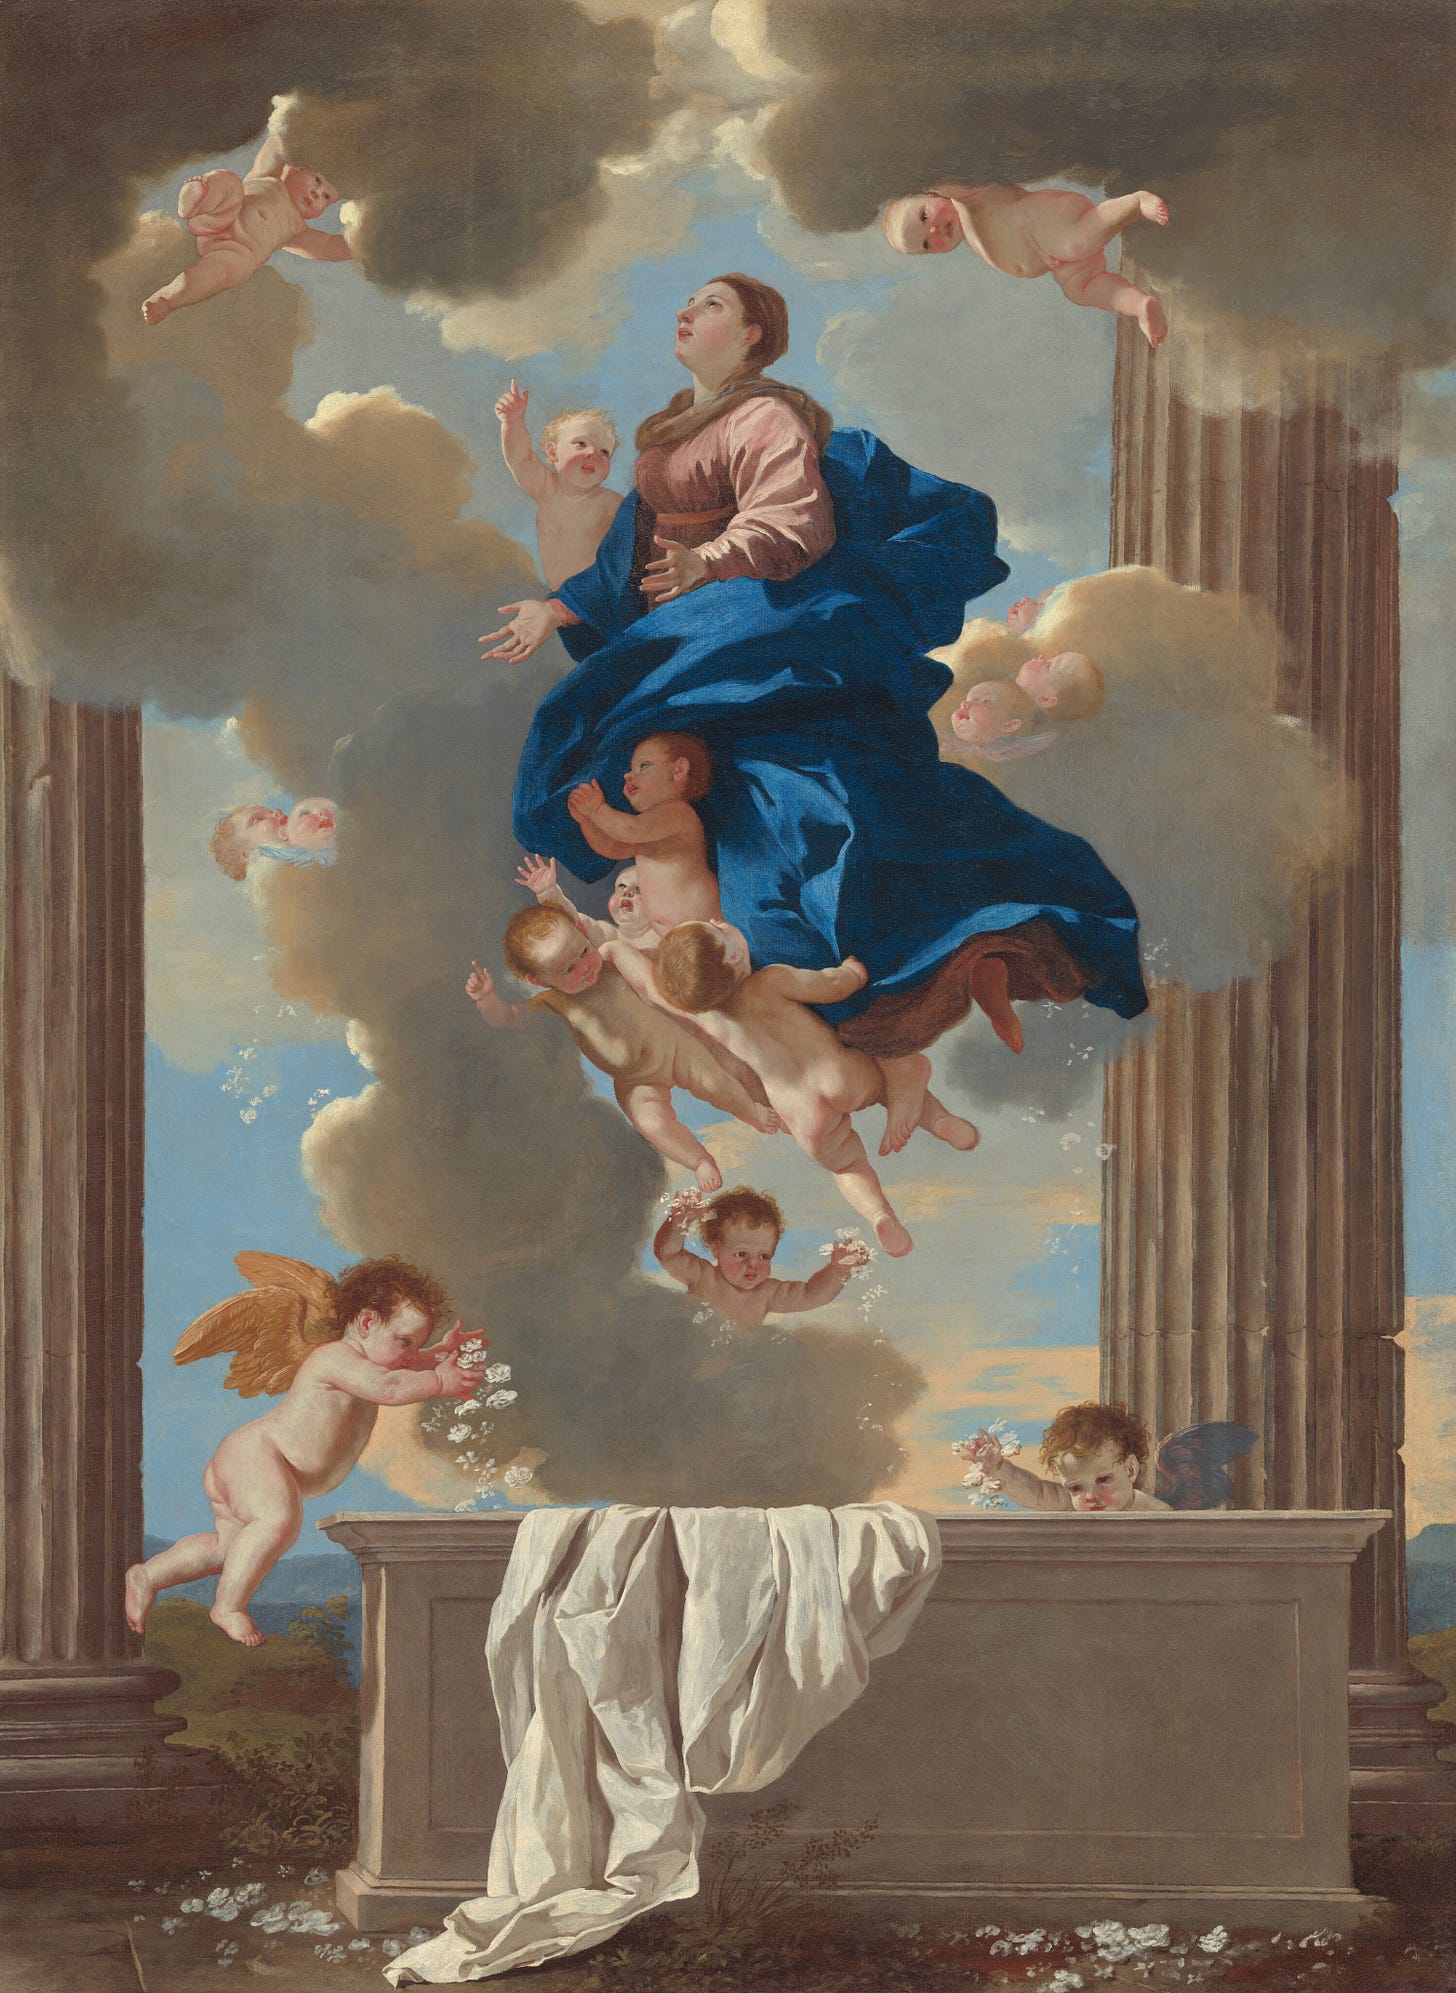 The Assumption of the Virgin, c. 1630/1632 by Nicolas Poussin